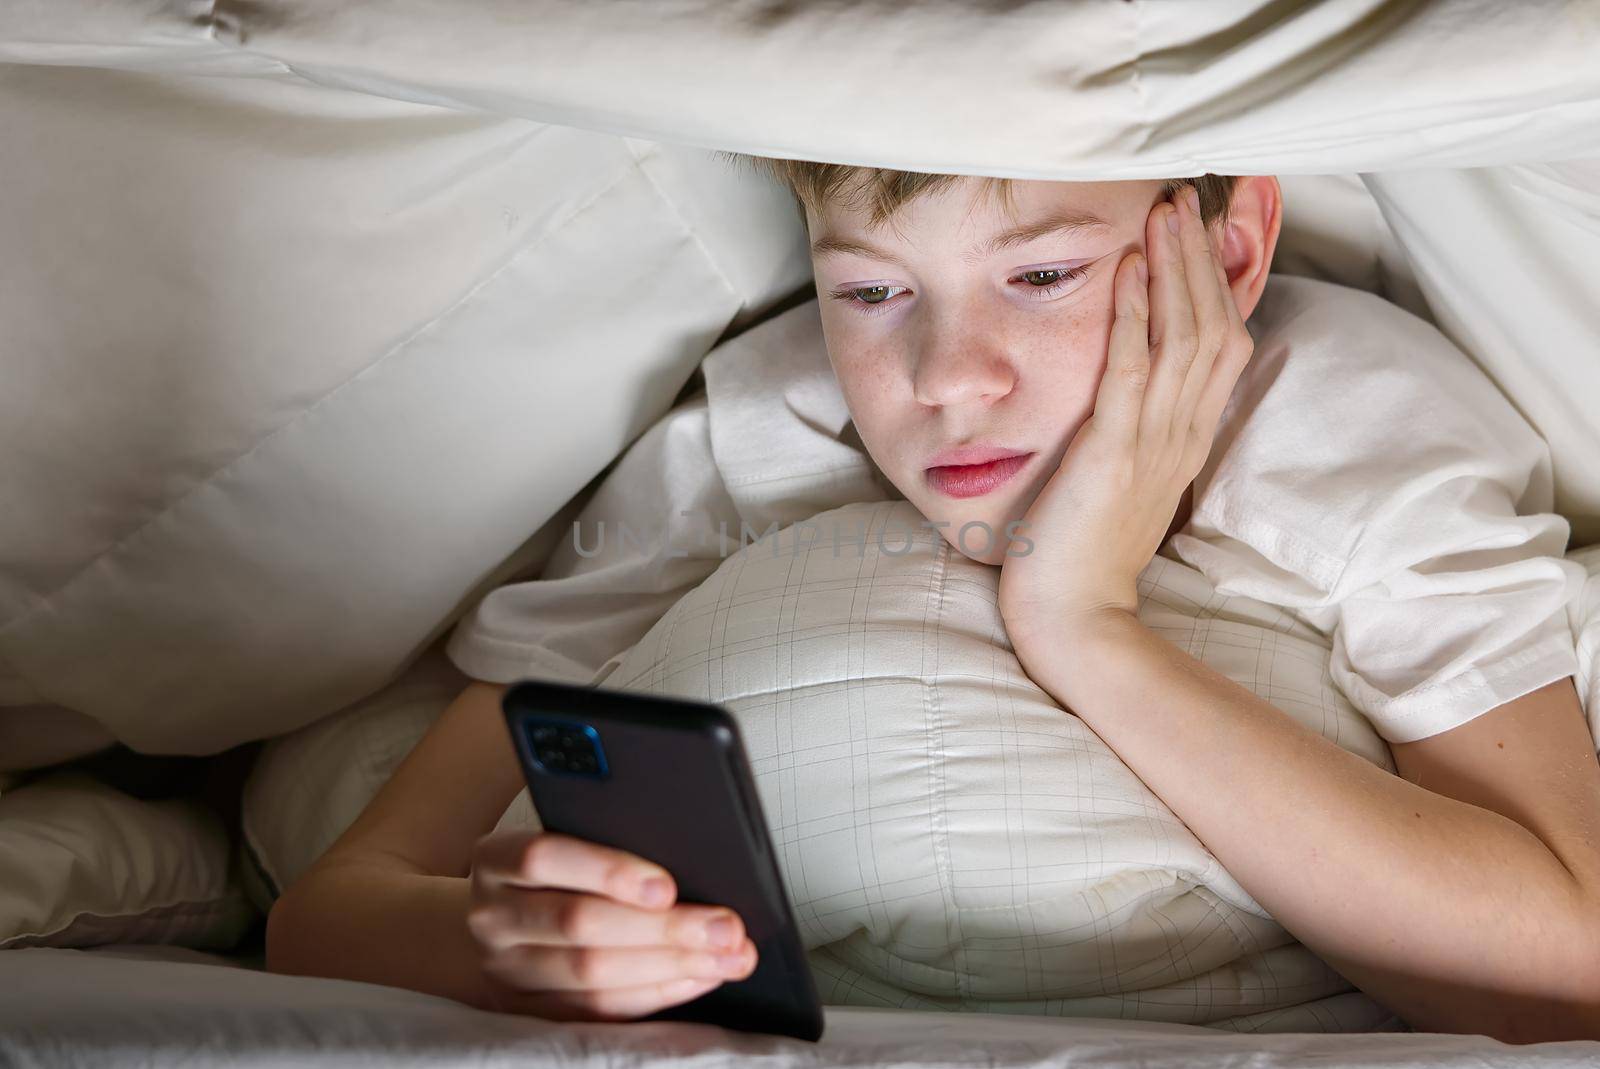 Boy under the blanket at night in his bed communicates on Internet. Child gadget addiction and insomnia. social media addiction by PhotoTime